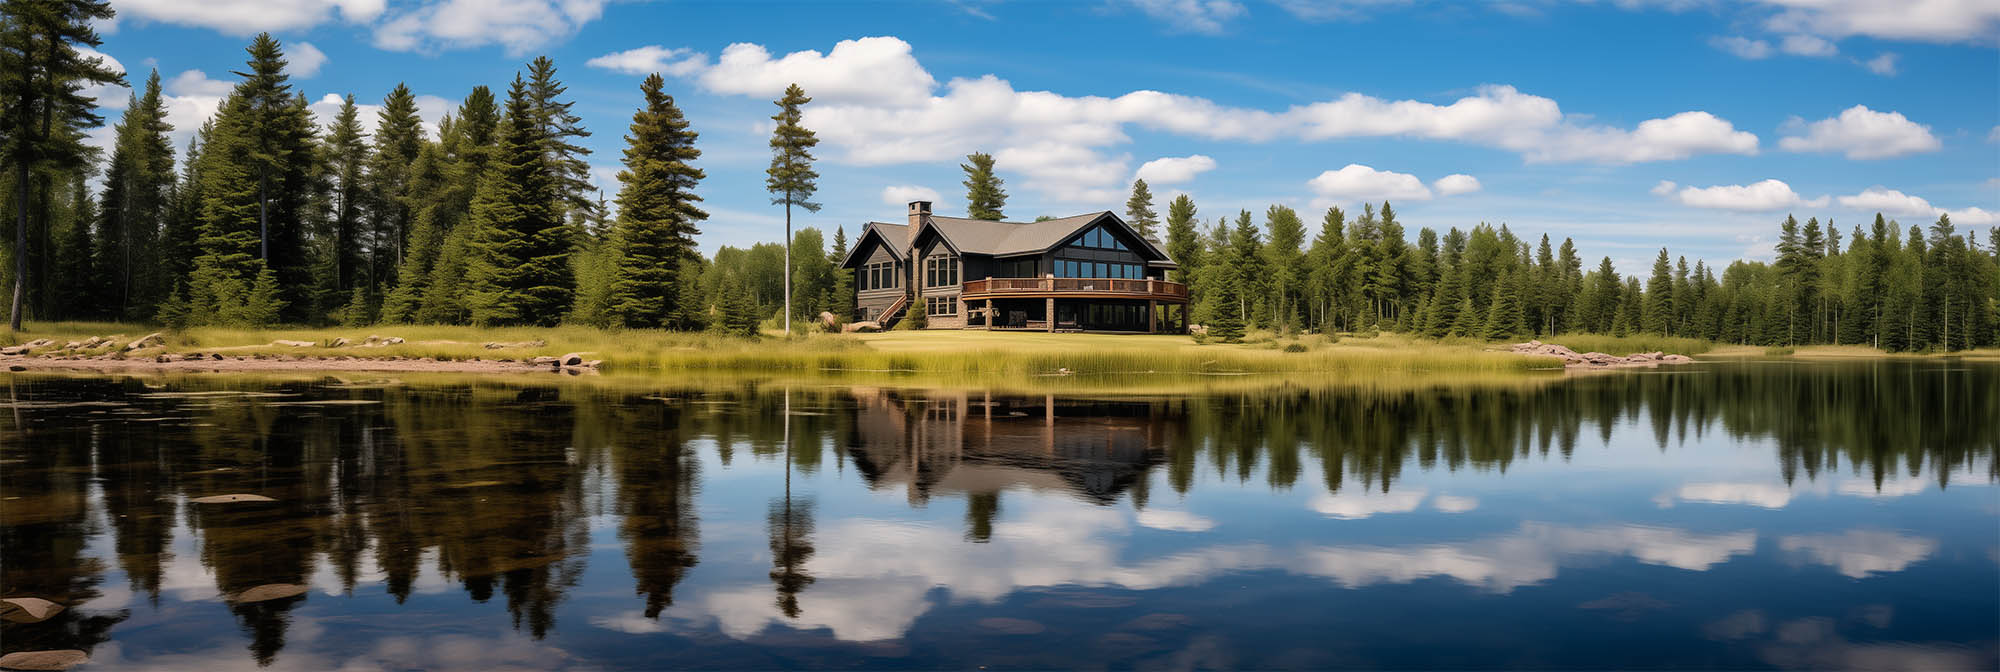 House on a lake, as a vacation rental